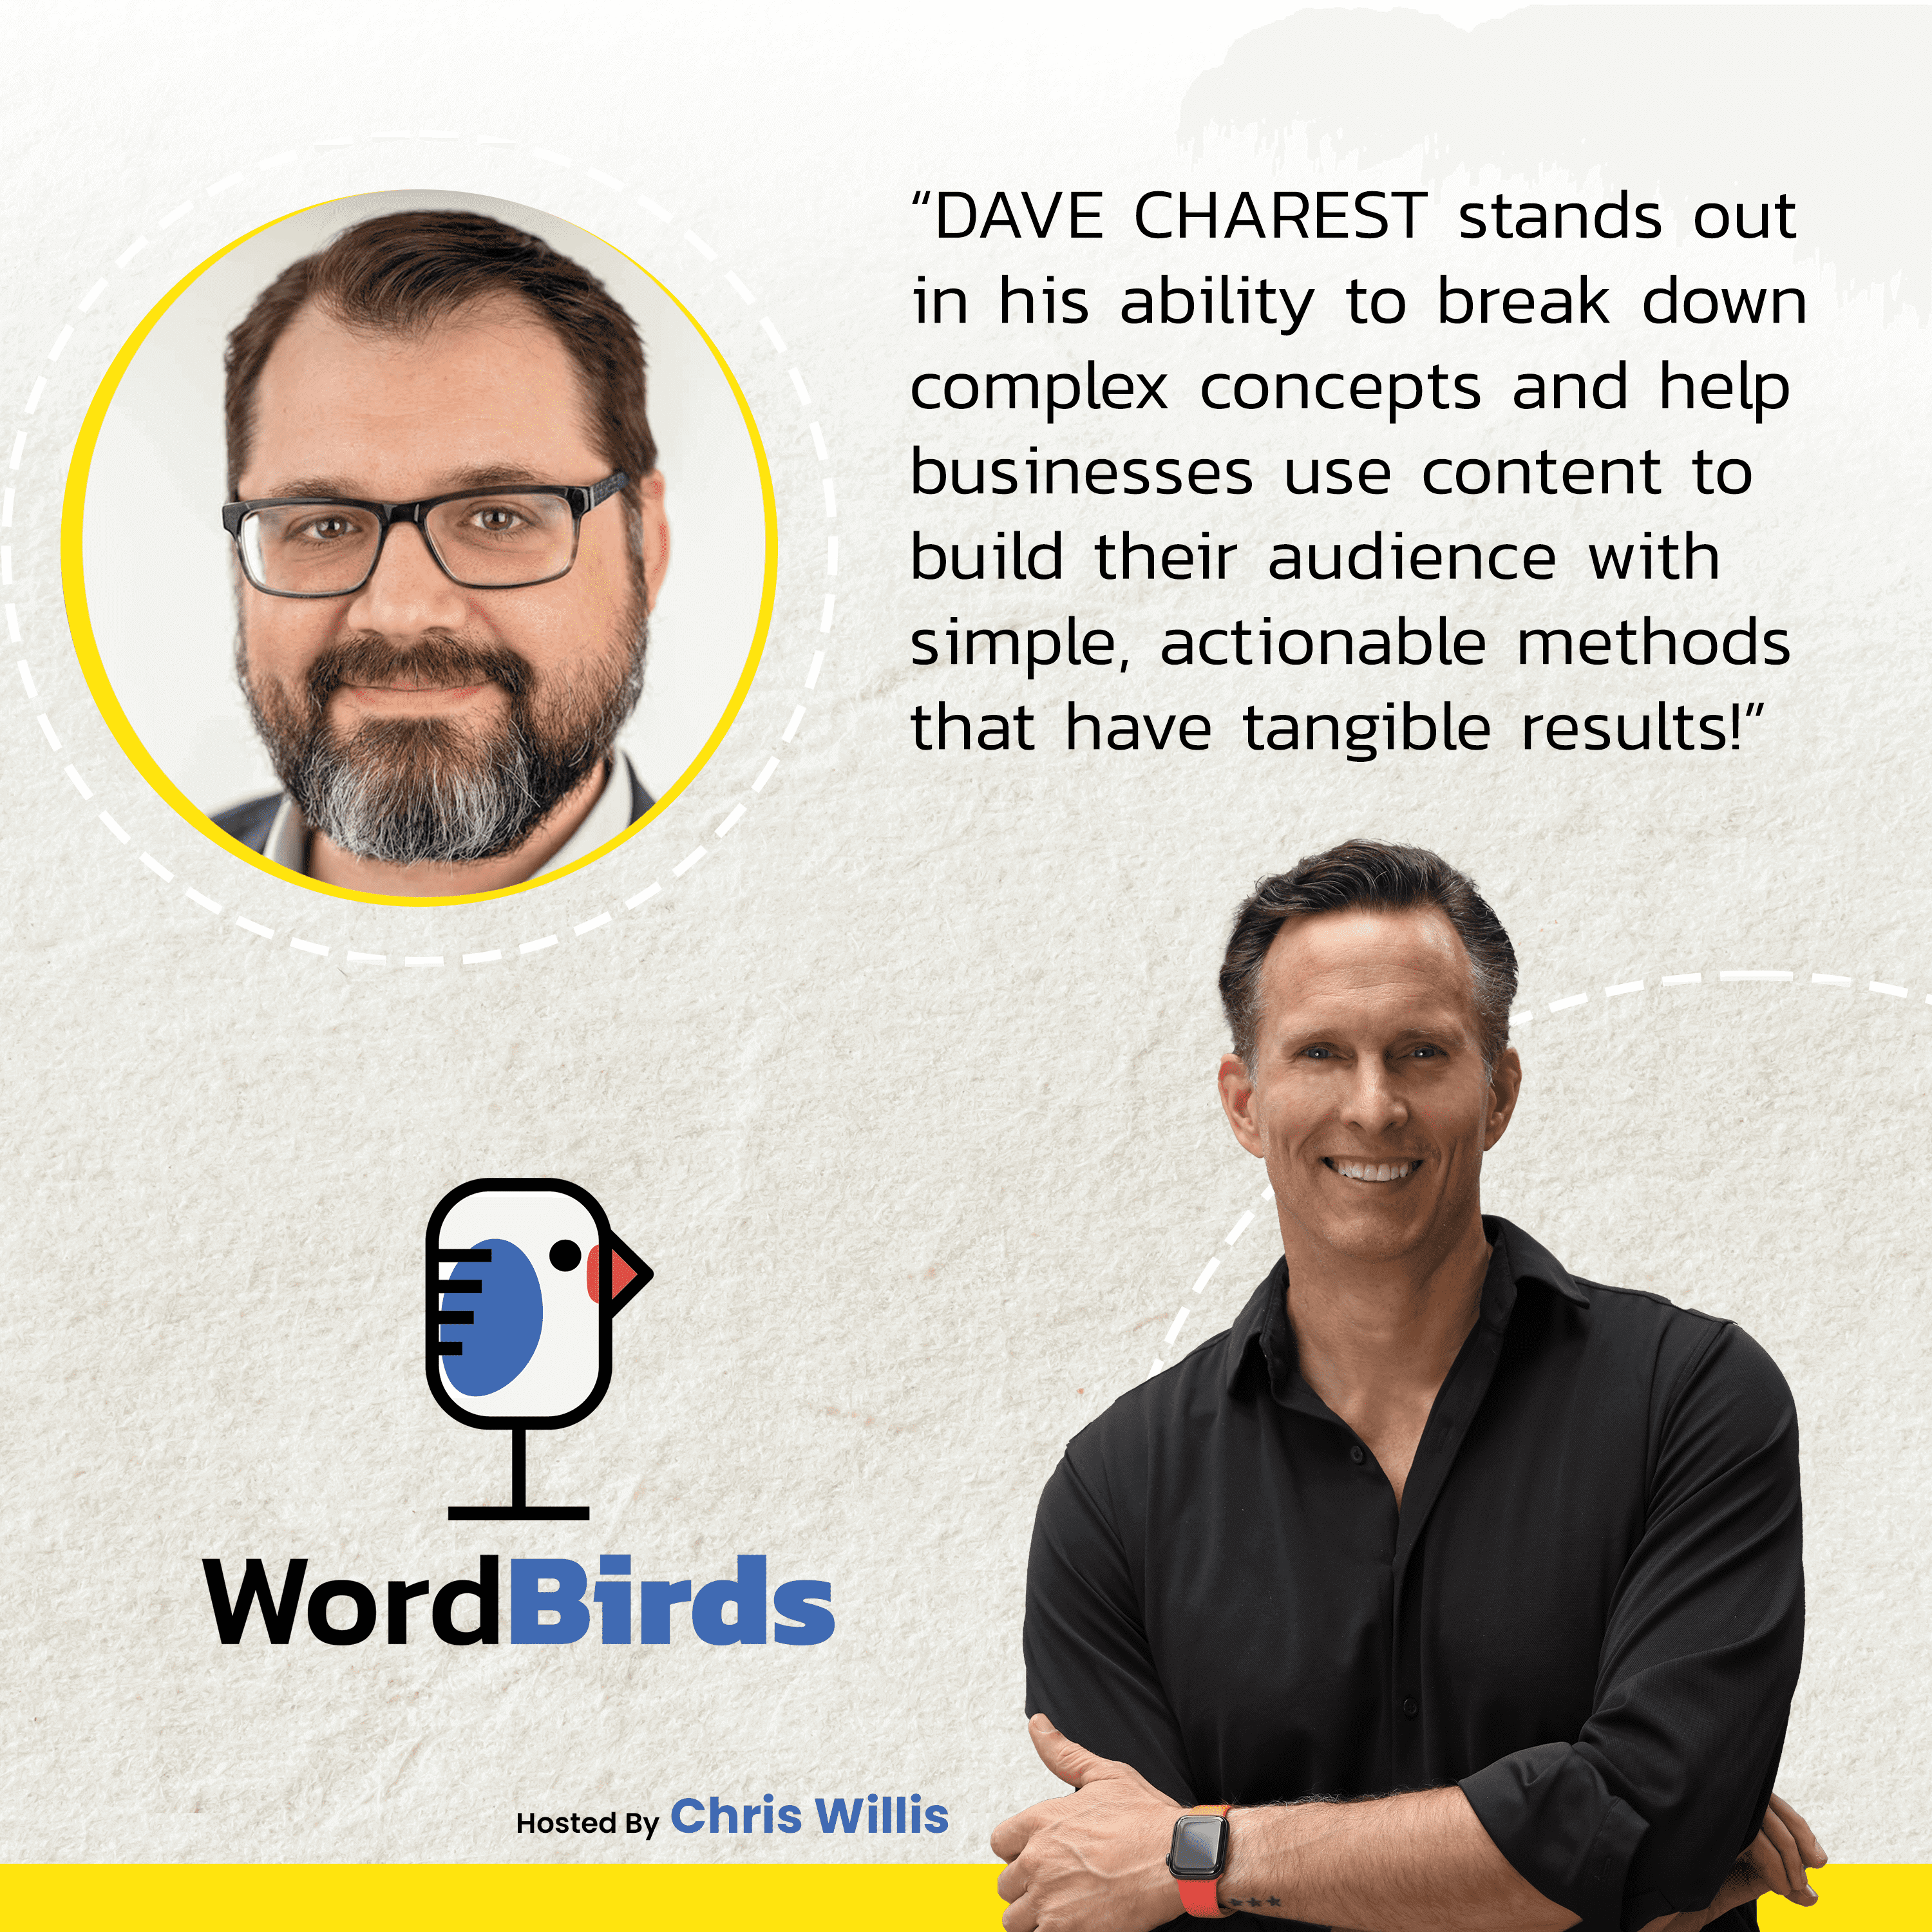 WOBI Dave Charest | Creating Content